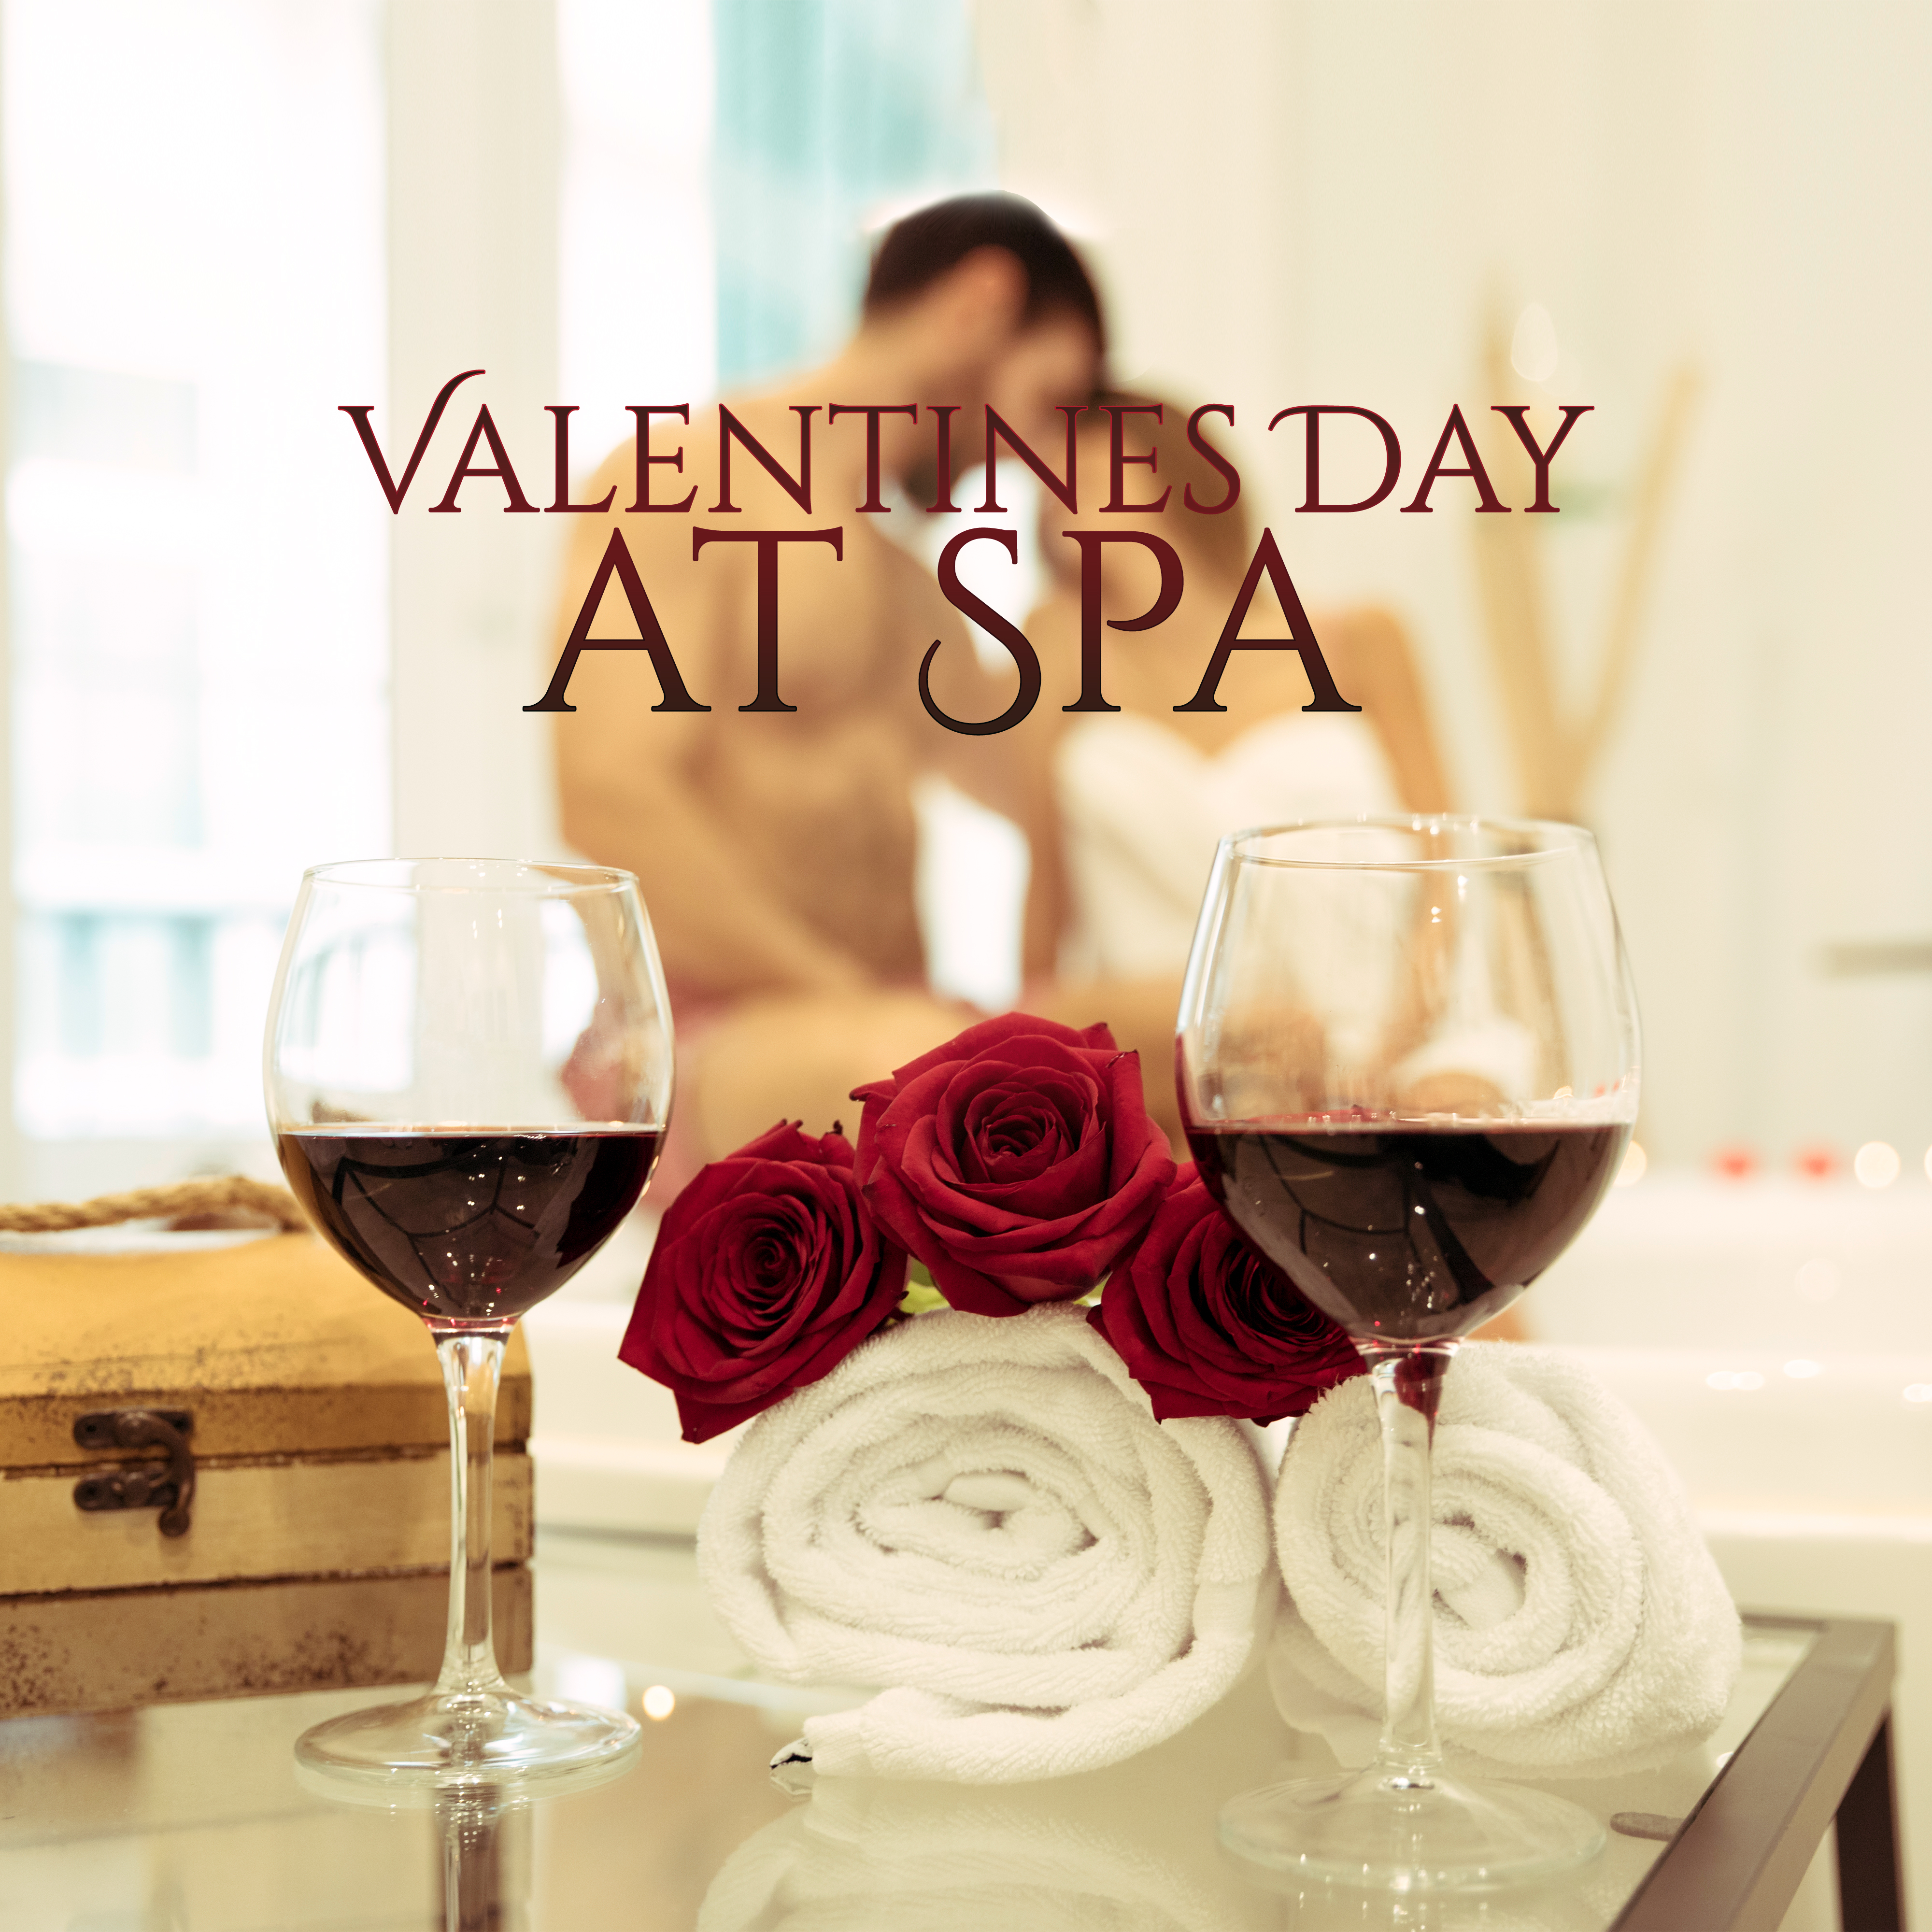 Valentines Day at Spa  Romantic Music for Relaxation, Sleep, Spa, Wellness, Tantric Massage, Zen Spa, Sensual Massage Music